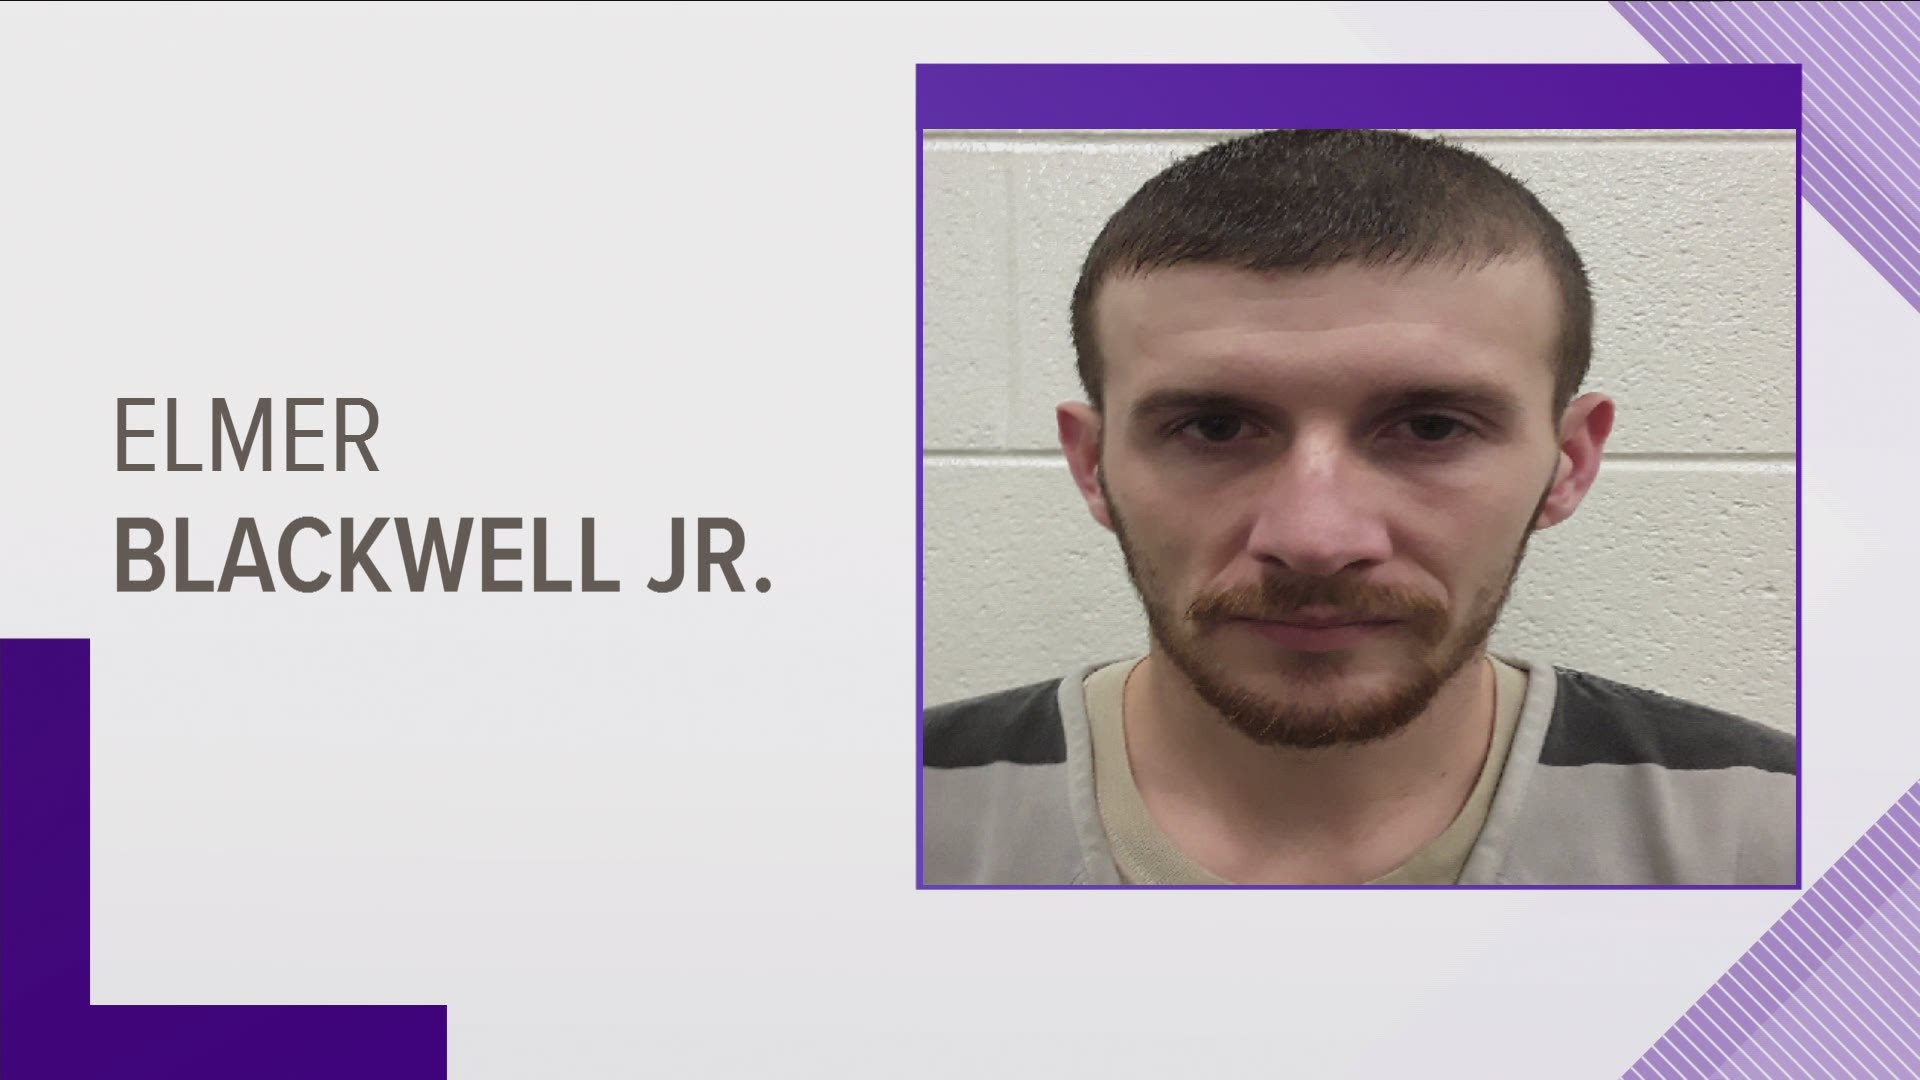 Court documents say Elmer Blackwell Jr. facing theft and vandalism charges for stealing 14 roosters from private property south of Madisonville.